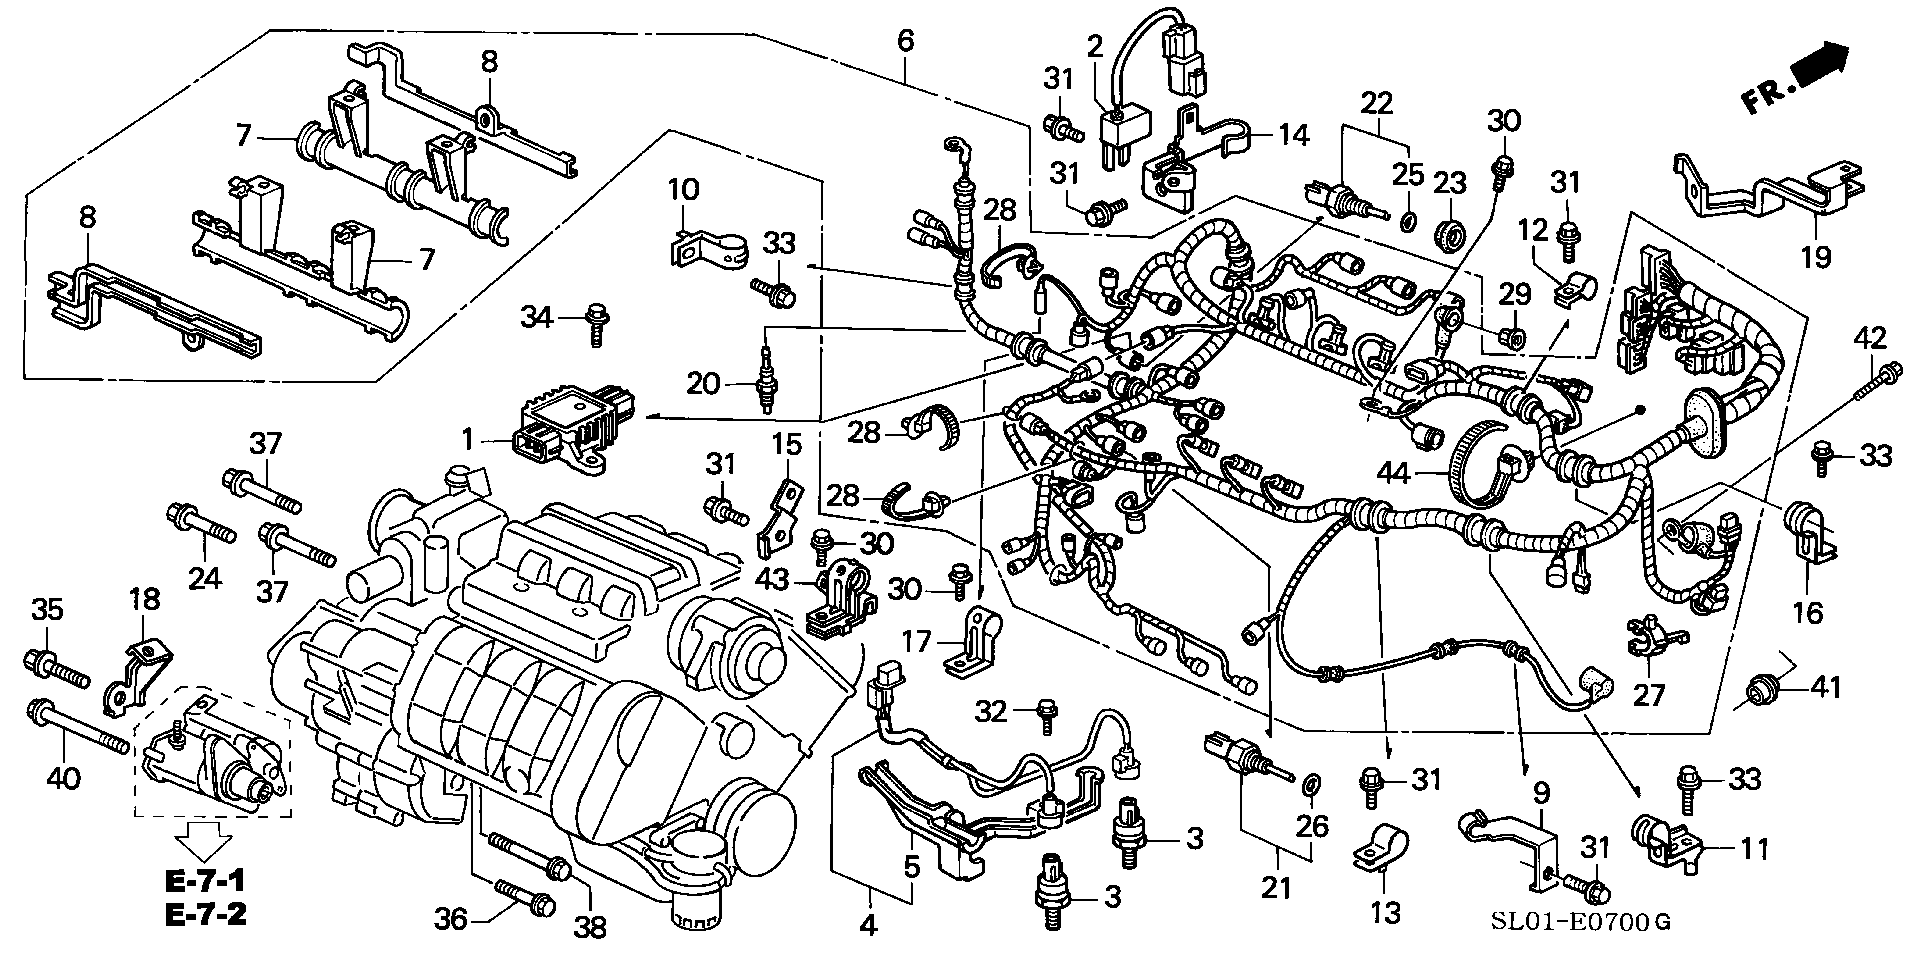 ENGINE WIRE HARNESS/ HARNESS CLAMP